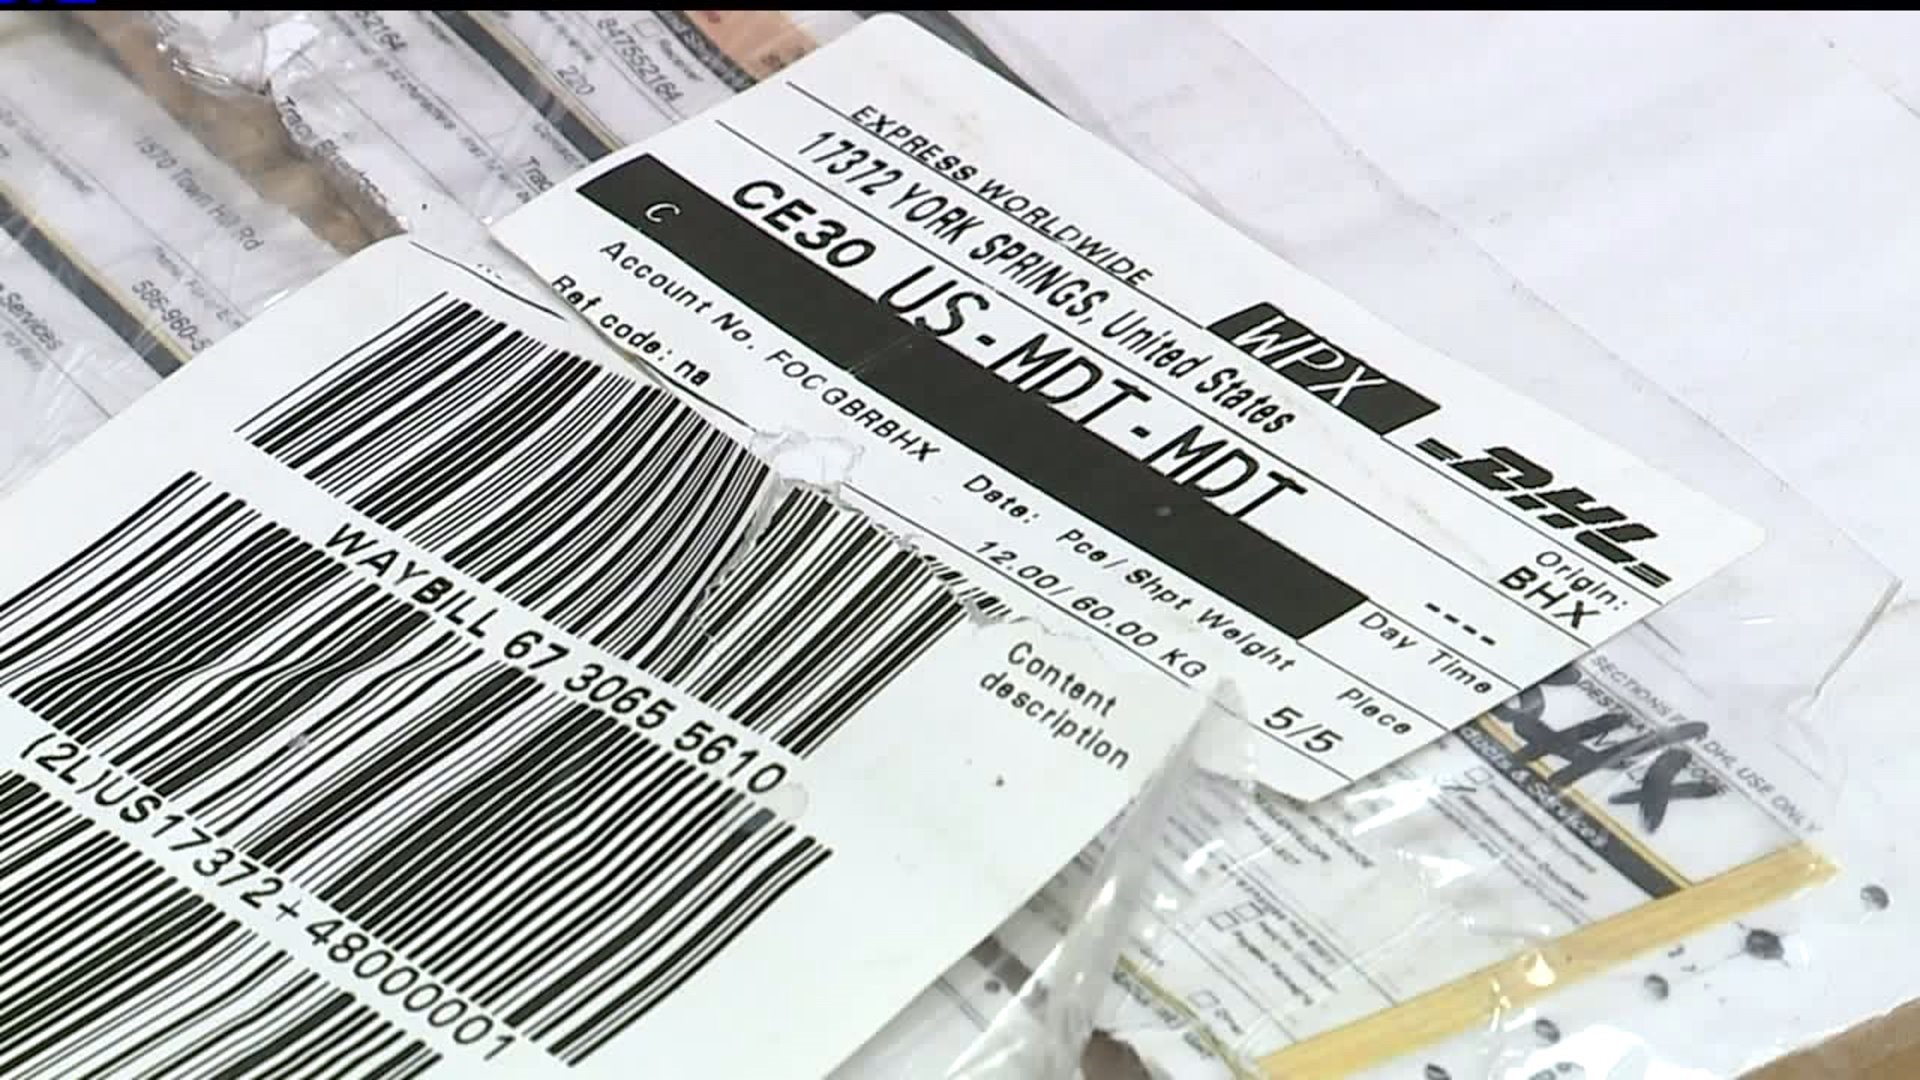 Repackaging scam discovered in Adams County